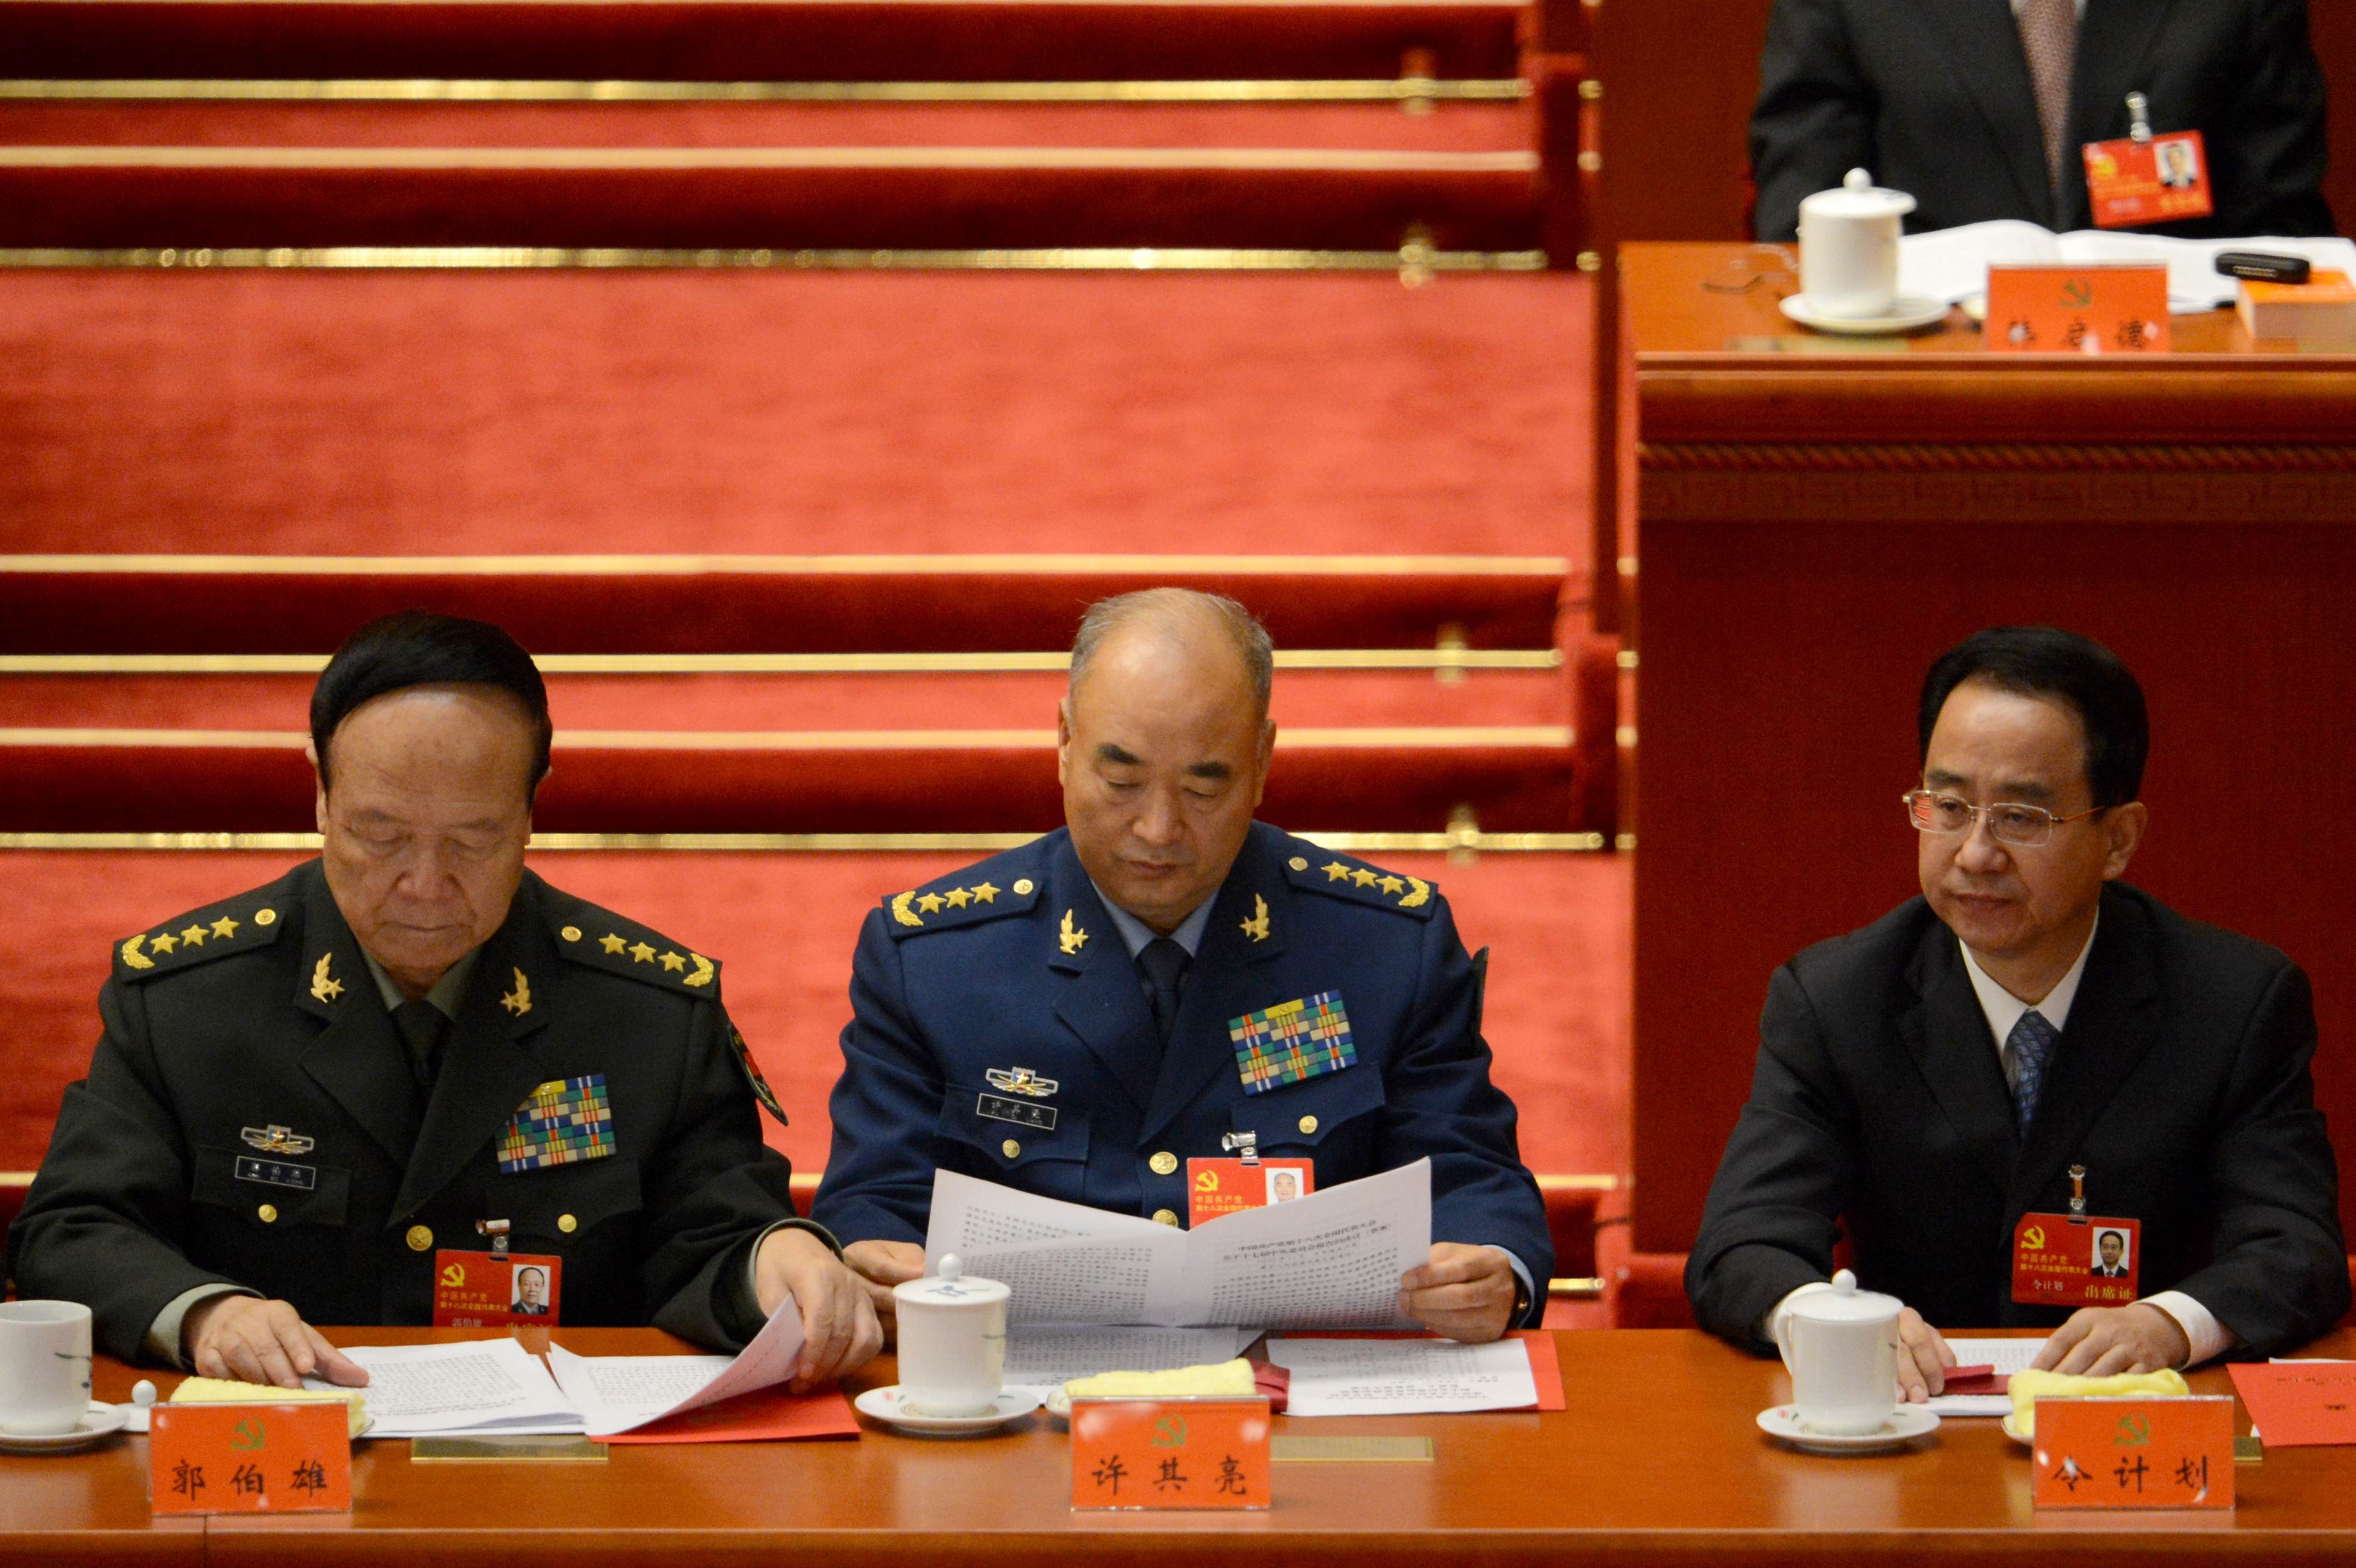 Ling Jihua next to generals Guo Boxiong, Xu Qiliang at the closing of the 18th Communist Party Congress at the Great Hall of the People in Beijing on 14 November 2012. Photo: AFP